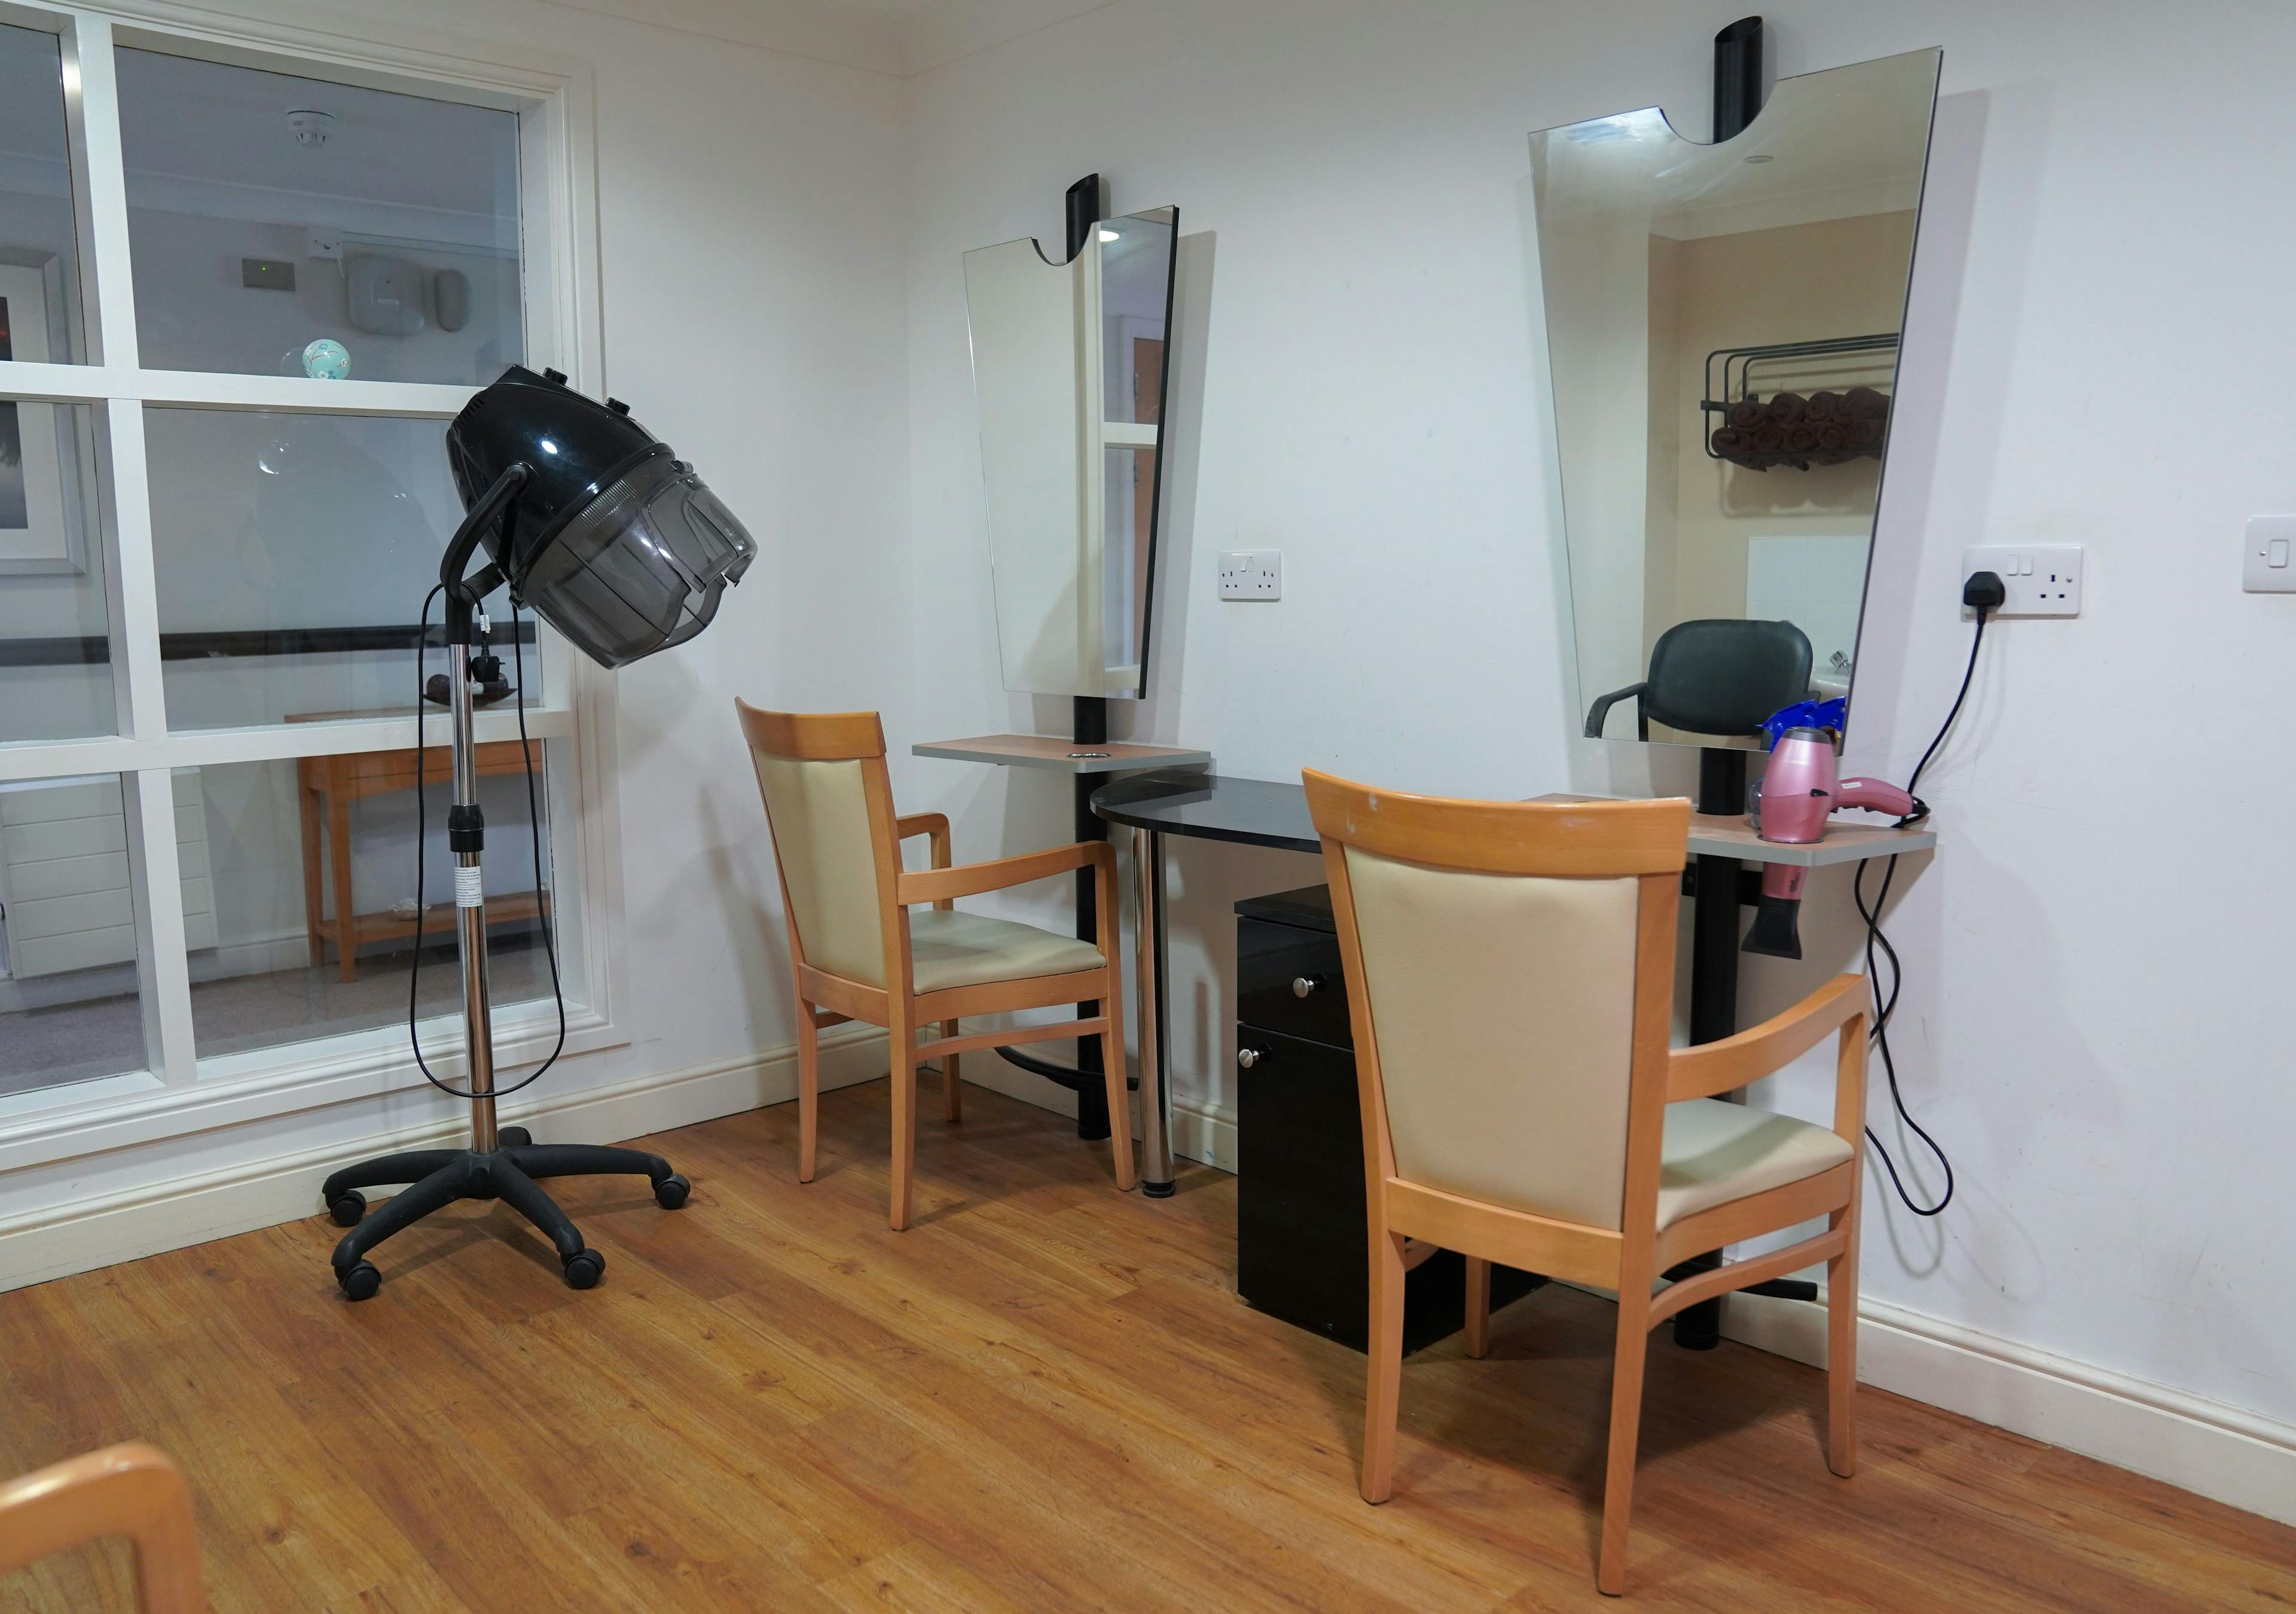 Salon at The Beeches Residential Care Home, Northfield, Birmingham